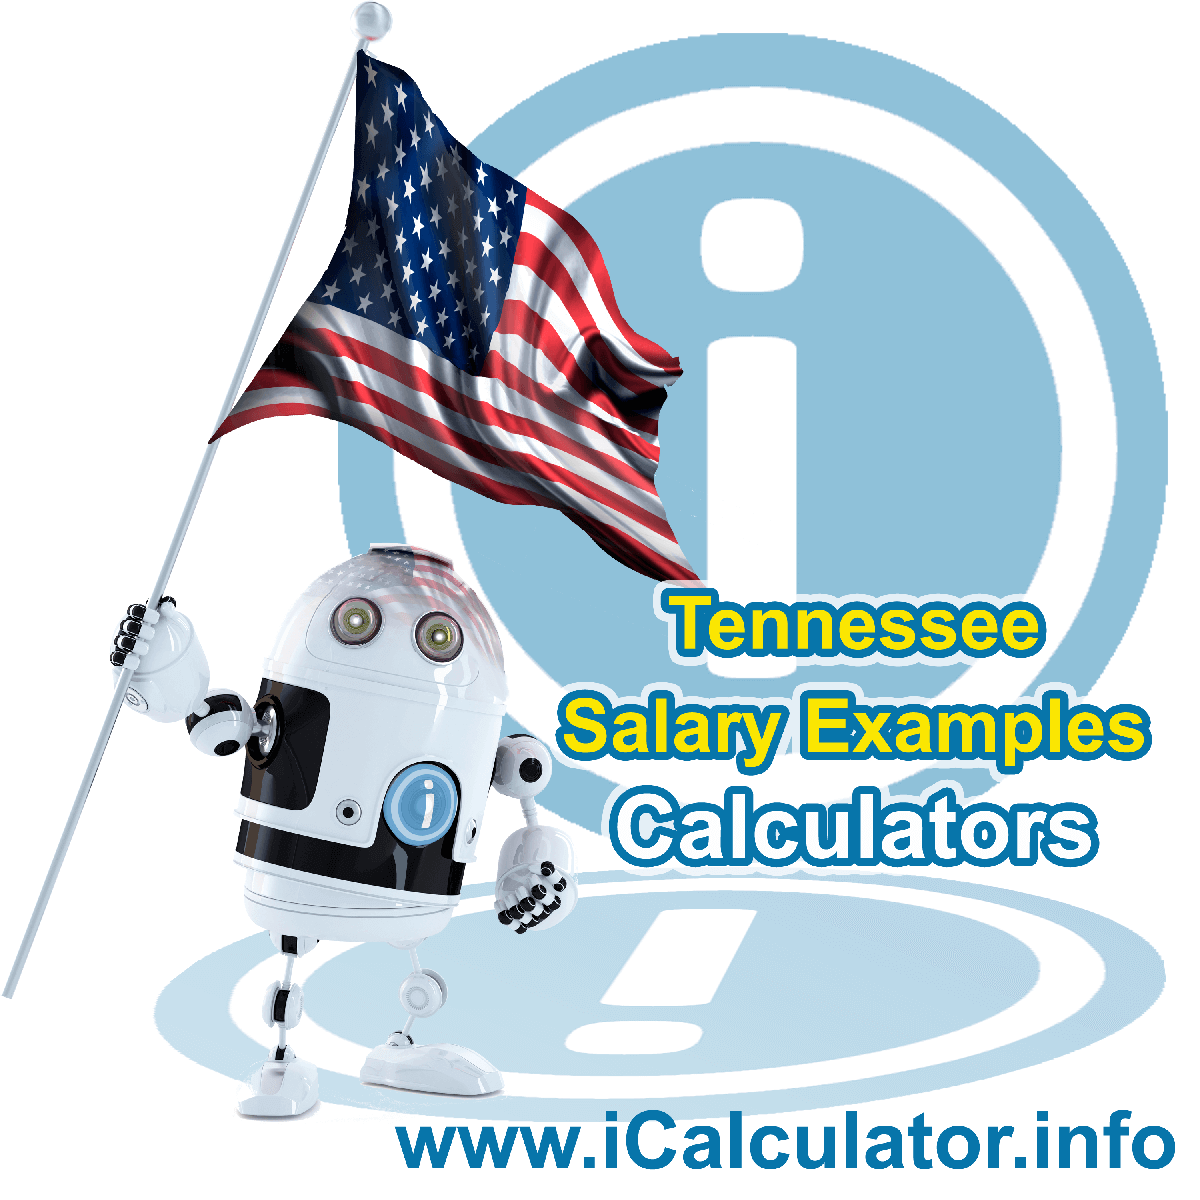 Tennessee Salary Example for $70,000.00 in 2022 | iCalculator™ | $70,000.00 salary example for employee and employer paying Tennessee State tincome taxes. Detailed salary after tax calculation including Tennessee State Tax, Federal State Tax, Medicare Deductions, Social Security, Capital Gains and other income tax and salary deductions complete with supporting Tennessee state tax tables 